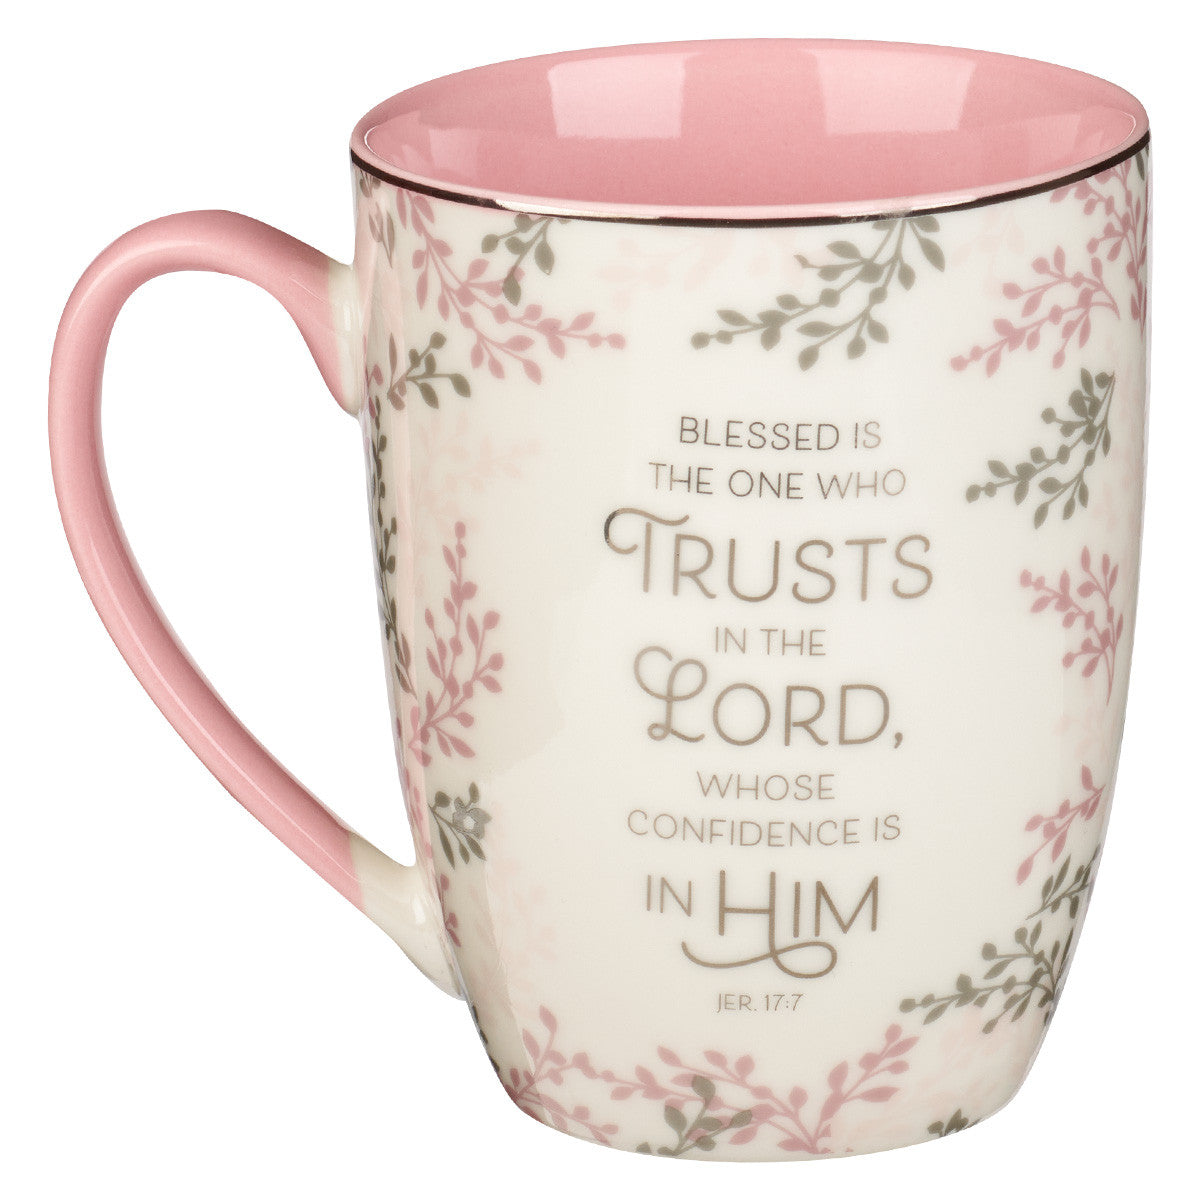 Blessed Man Ceramic Coffee Mug with Dipped Clay Base - Jeremiah 17:7